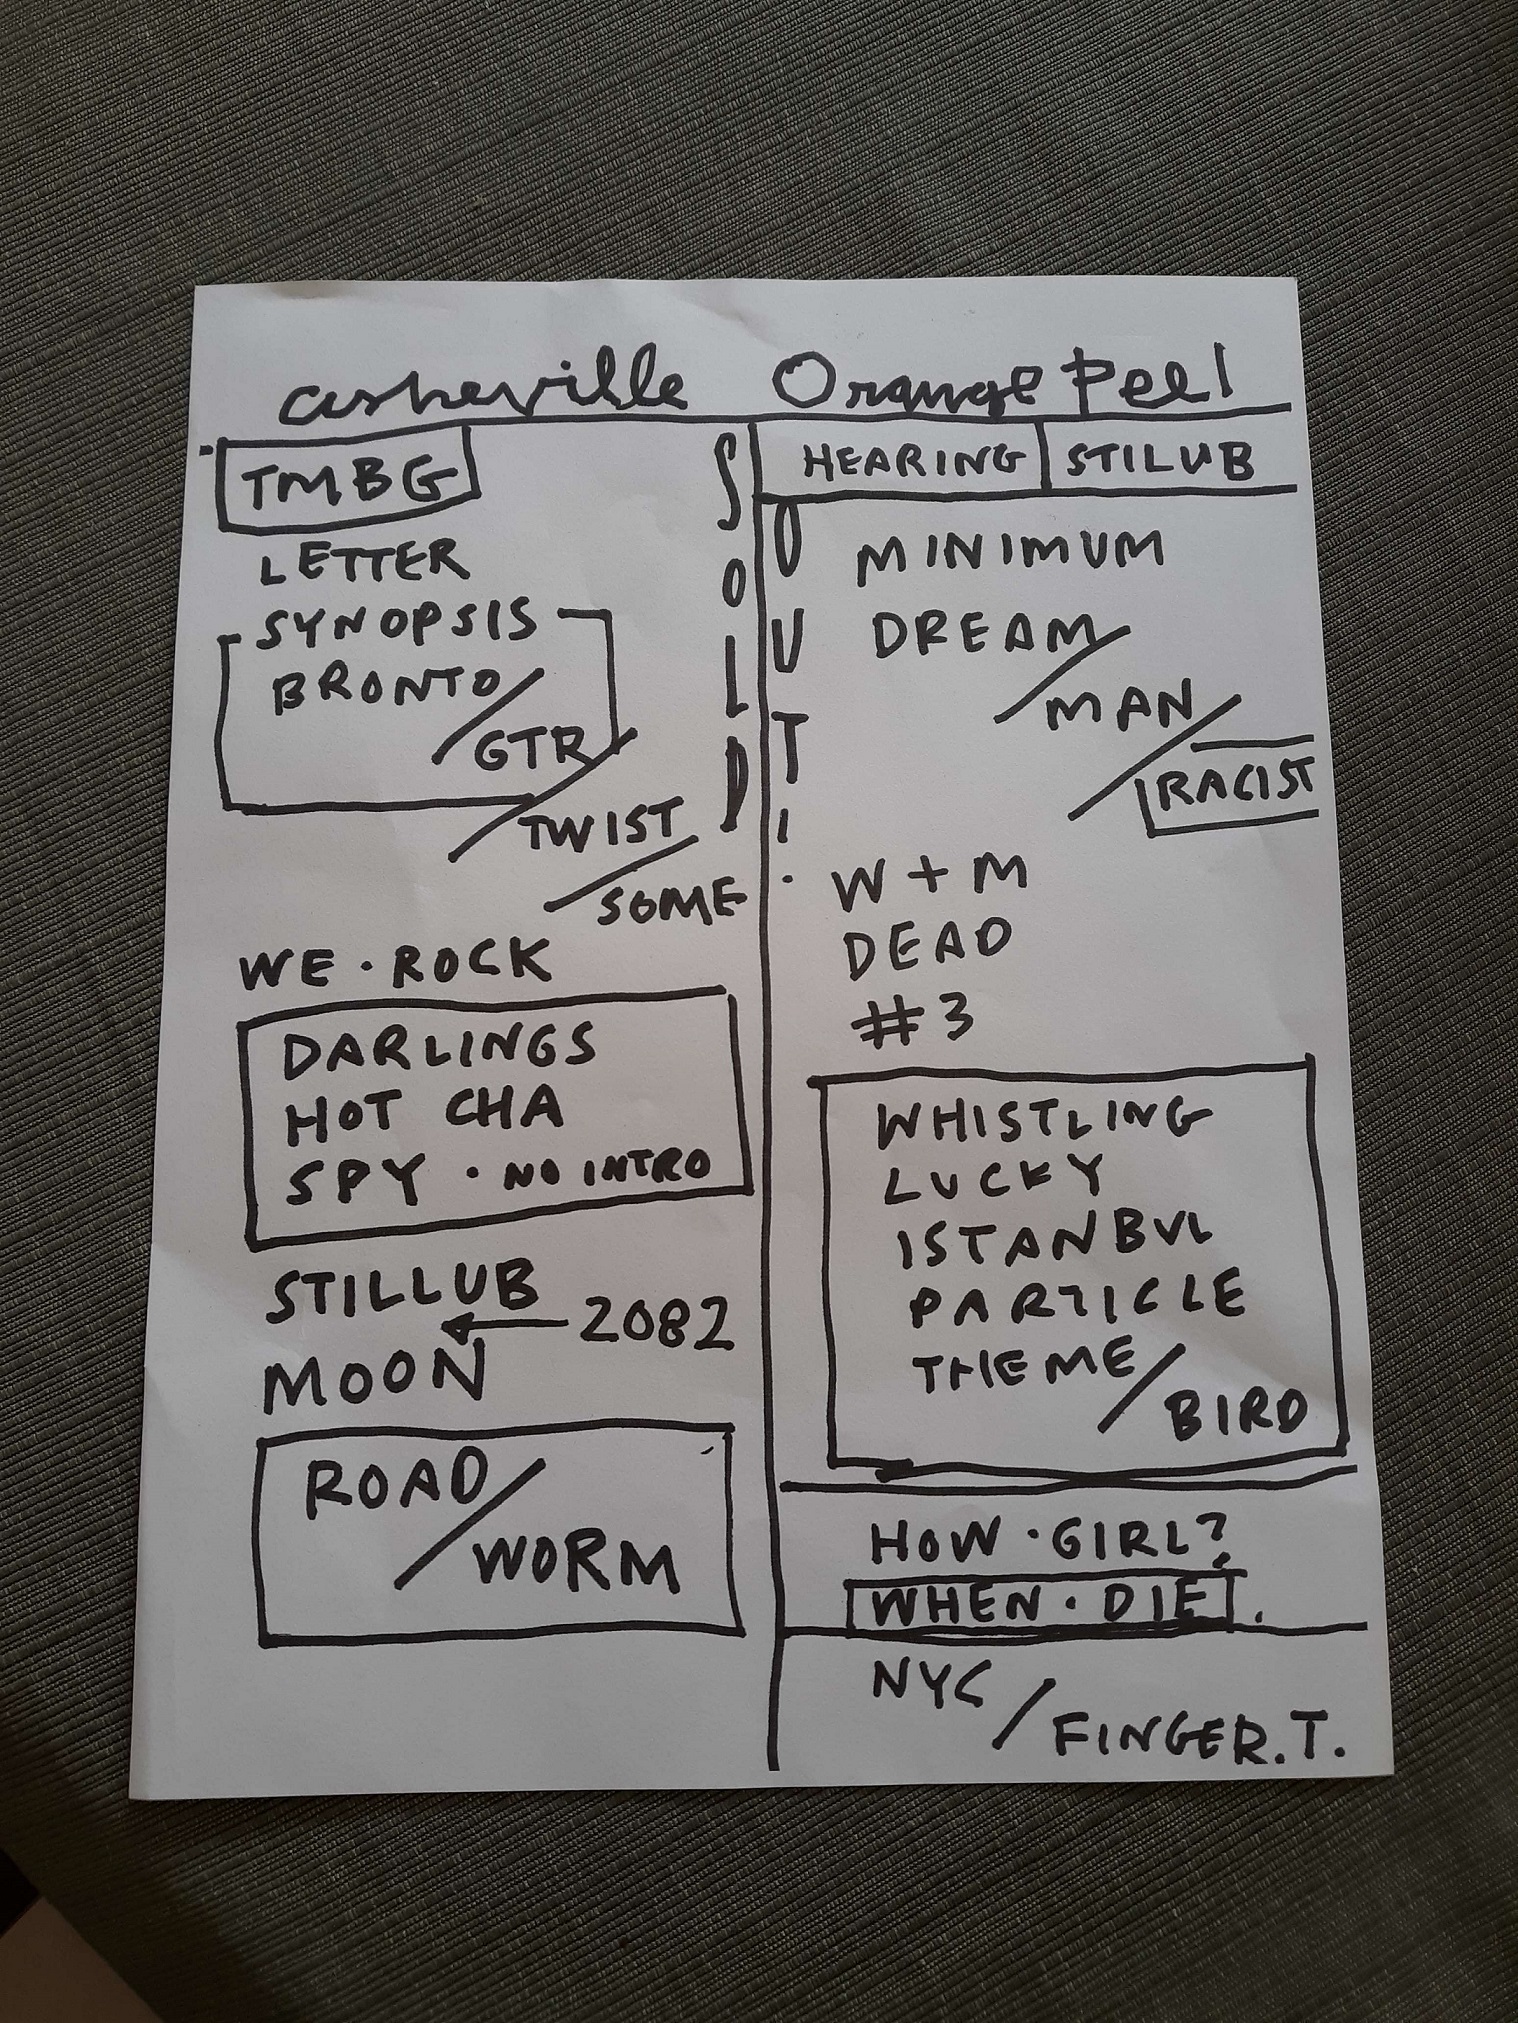 A written setlist of the They Might Be Giants show in Asheville.